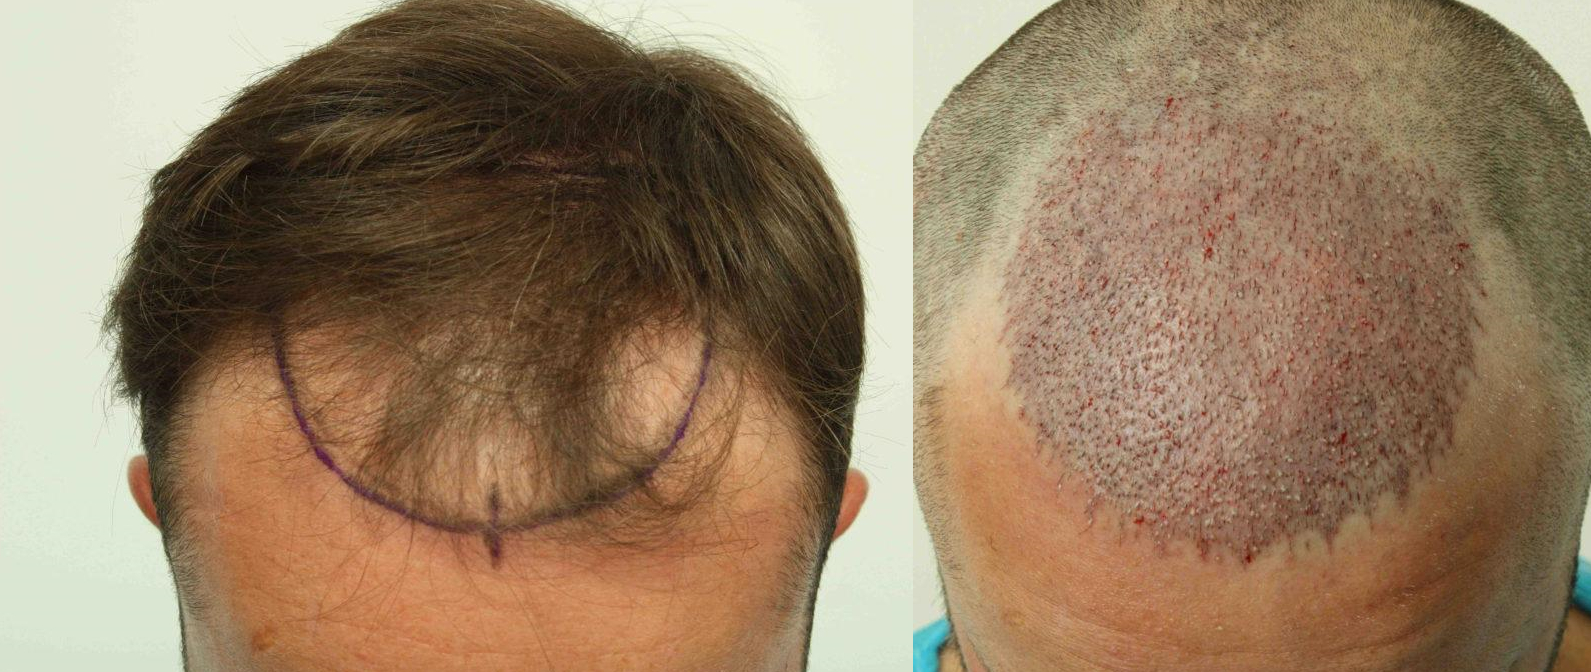 Hair Transplant Result After 20 Days - YouTube